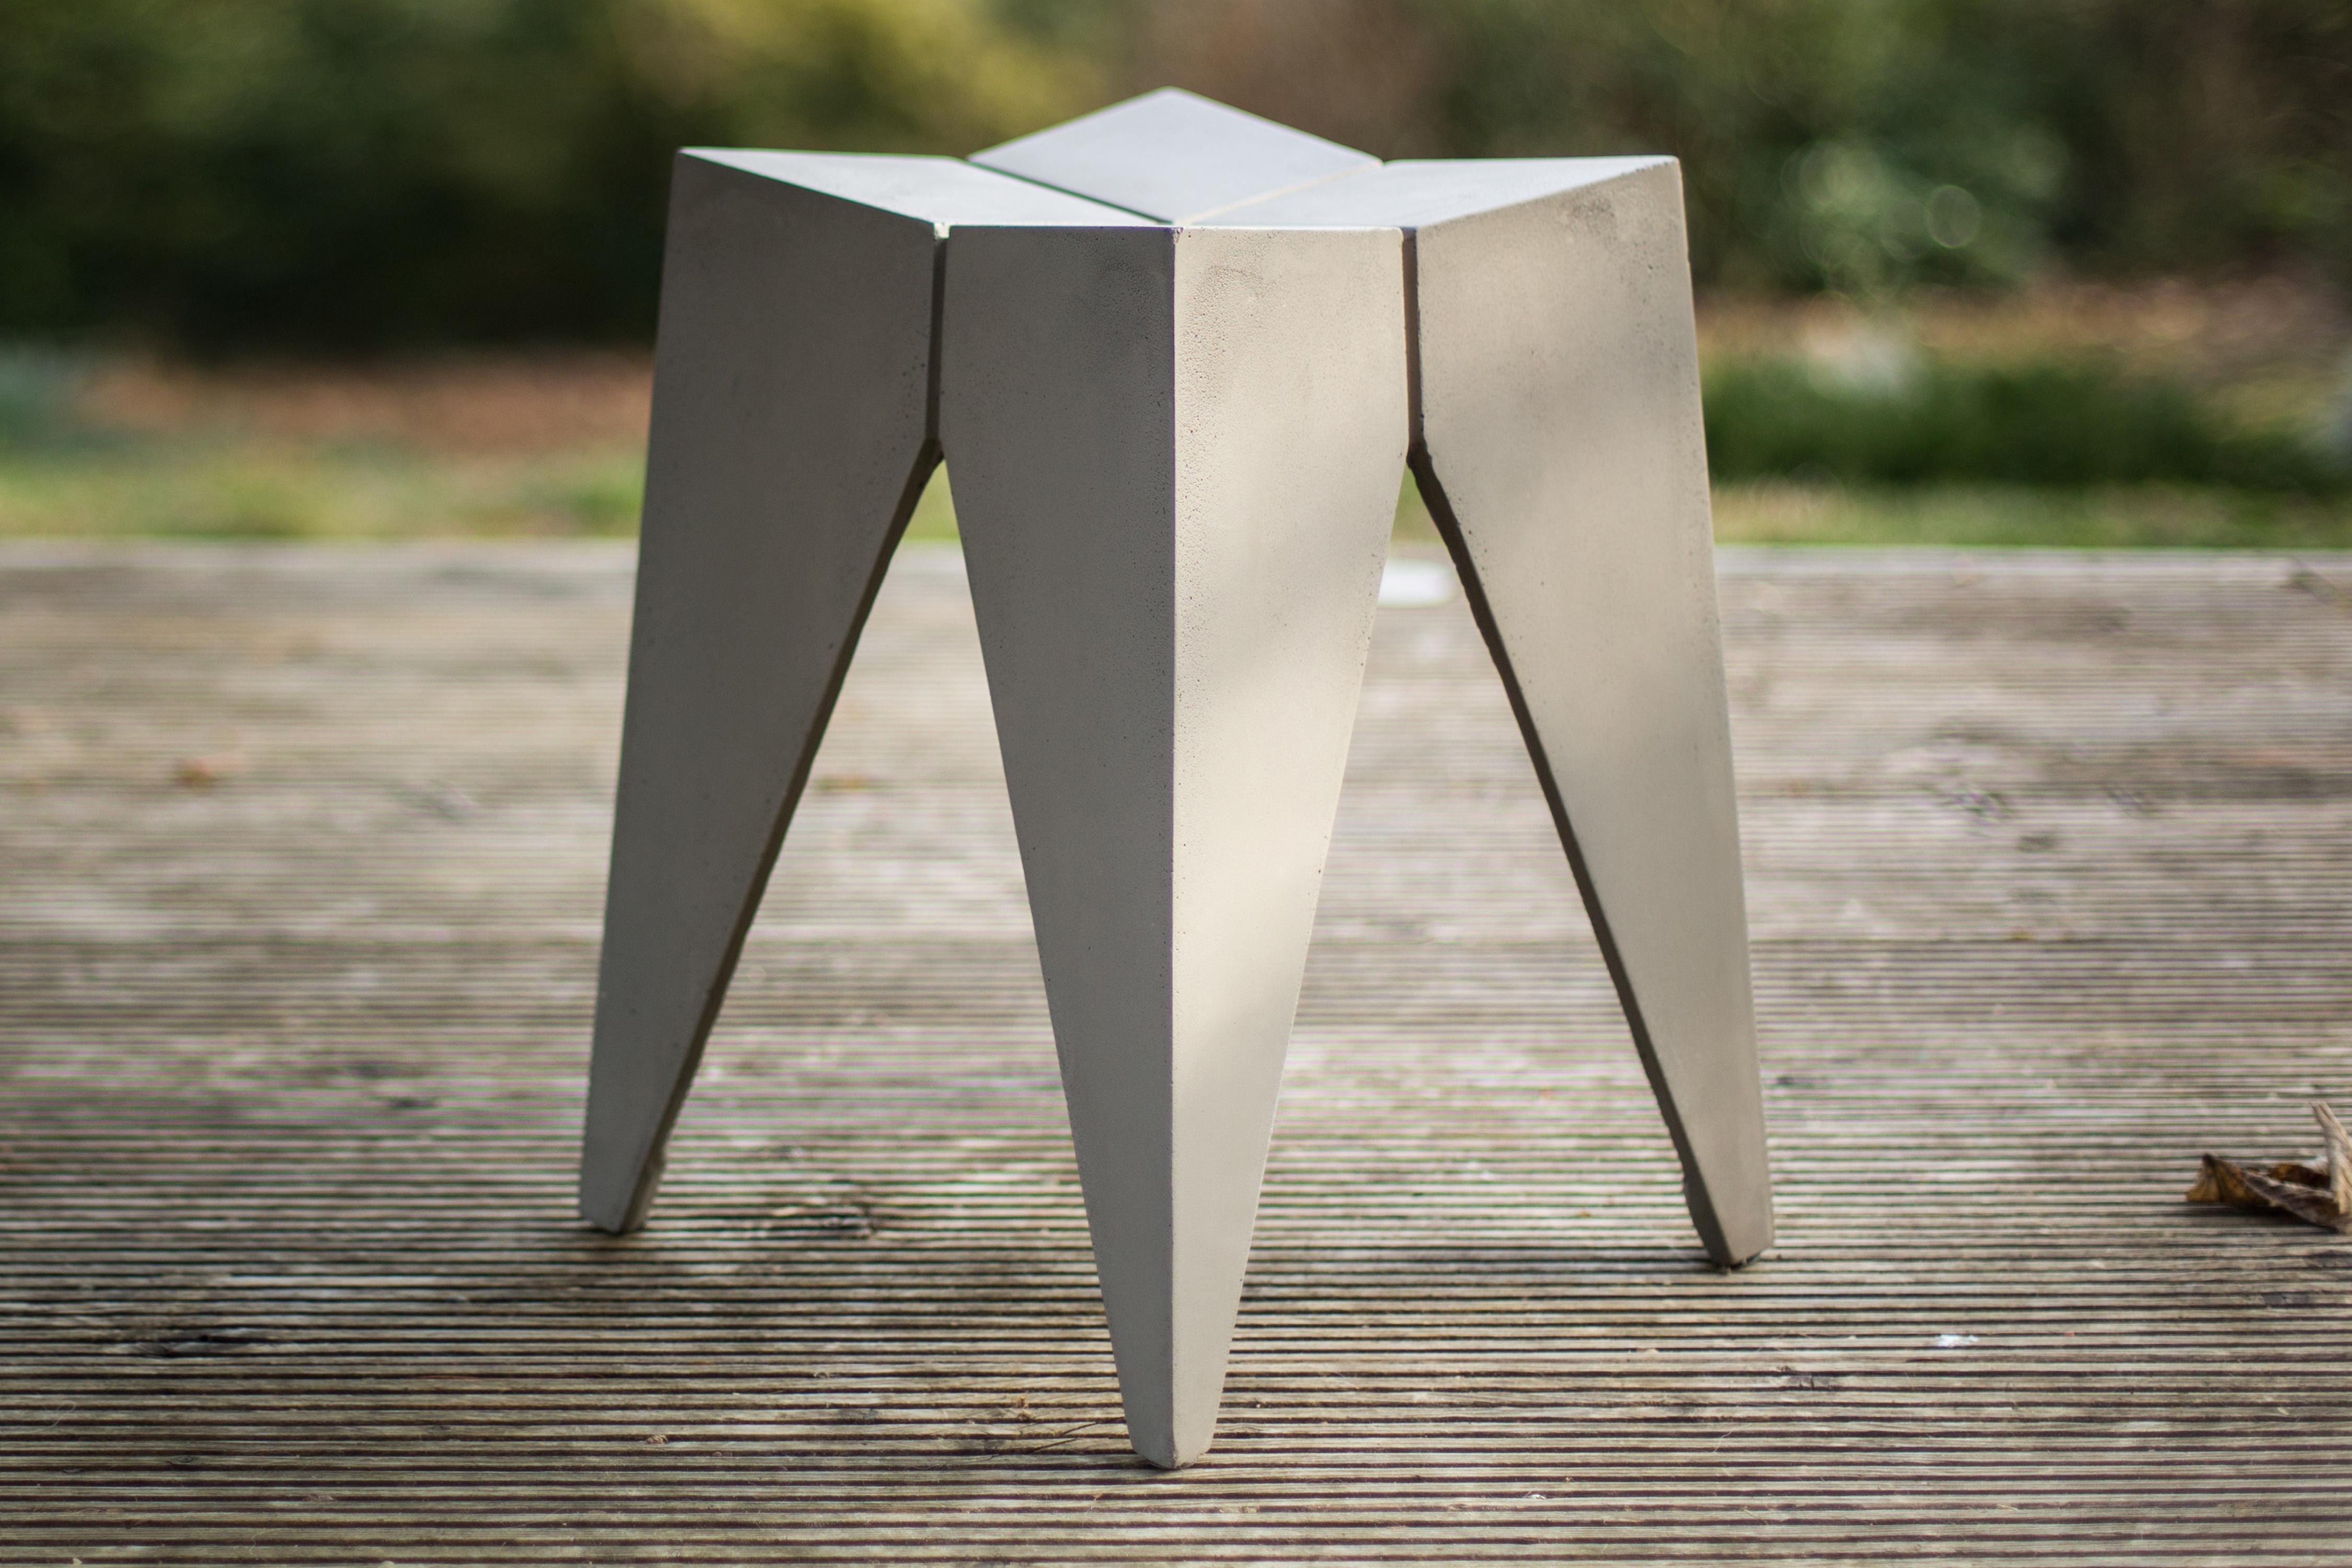 The Concrete Bridge stool designed by Henri Lavallard Boget for Lyon Béton, has a bold sculptural shape which heightens the industrial aesthetic. Elegant and practical, the concrete stool is perfect as a stool for the living room, bedroom, bathroom